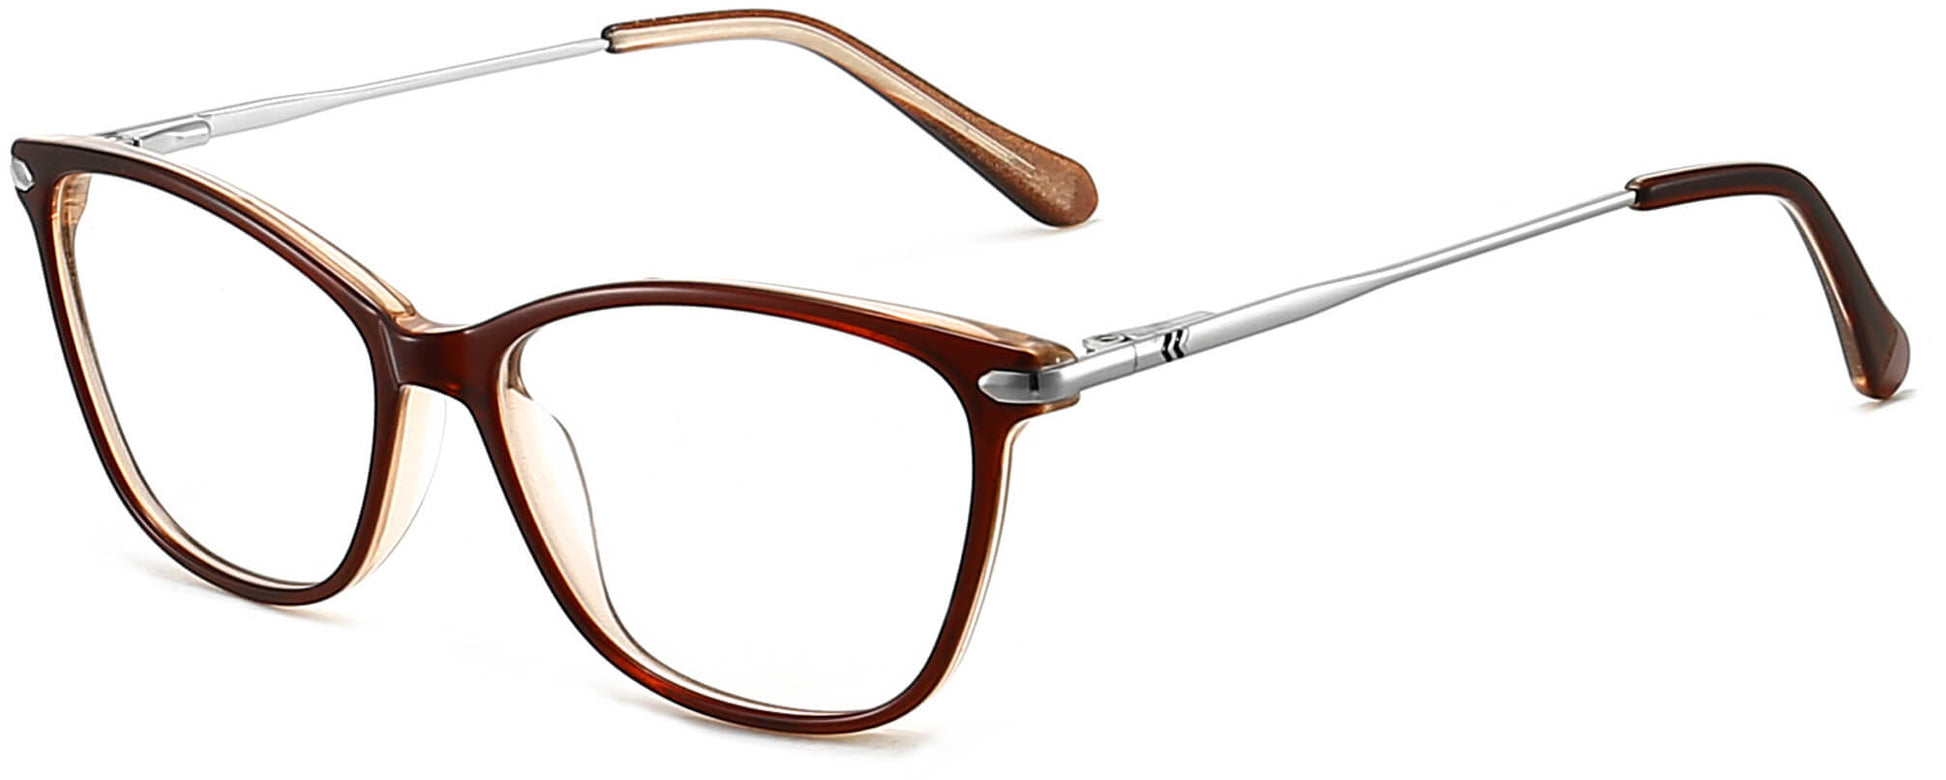 Enyon cateye brown Eyeglasses from ANRRI, angle view